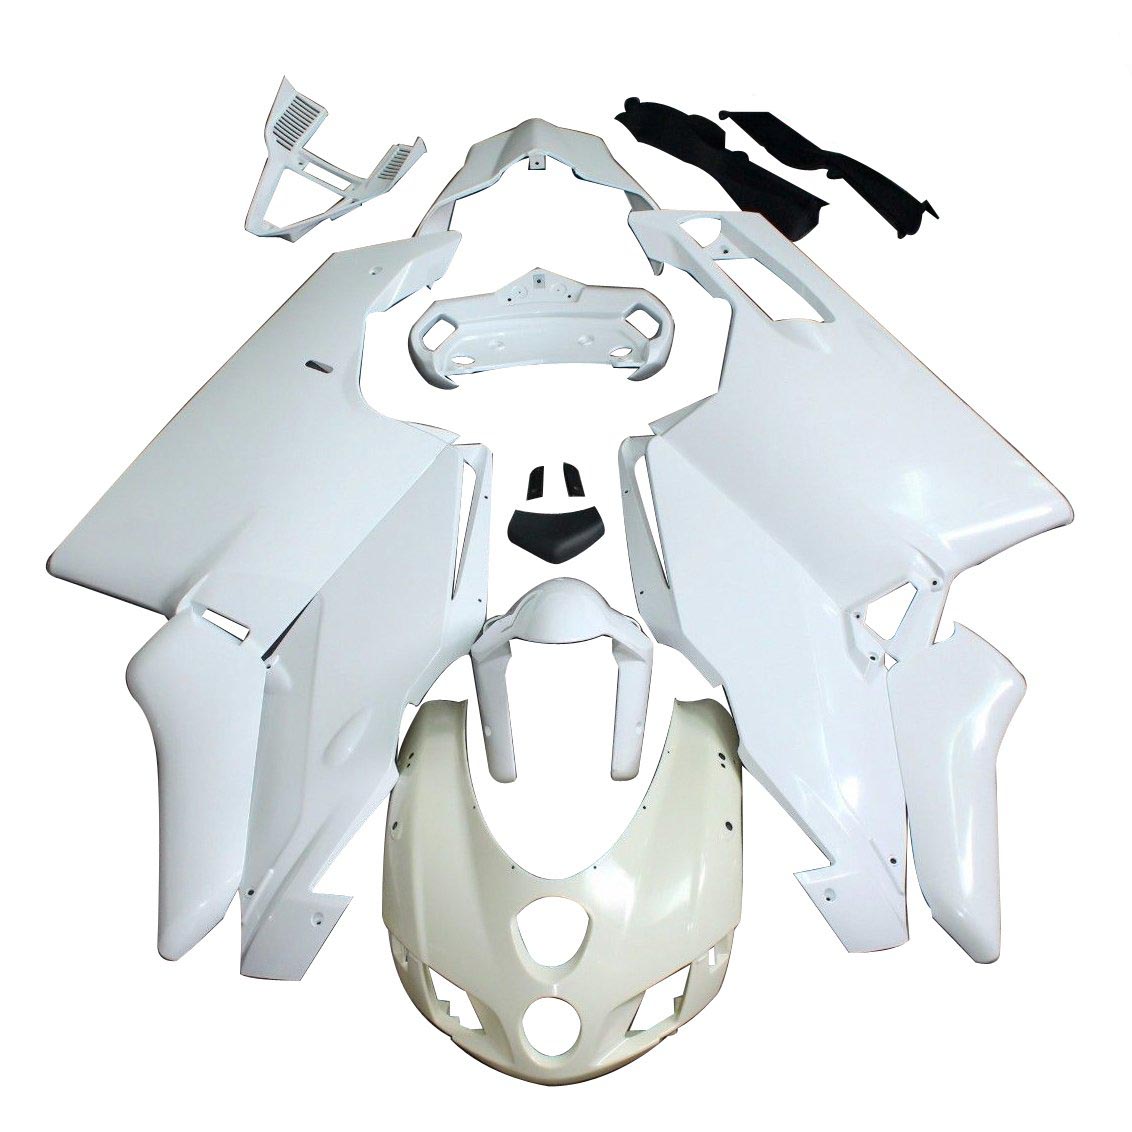 Bodywork Fairing ABS Injection Molding Unpainted for Ducati 996/748 1994-2002